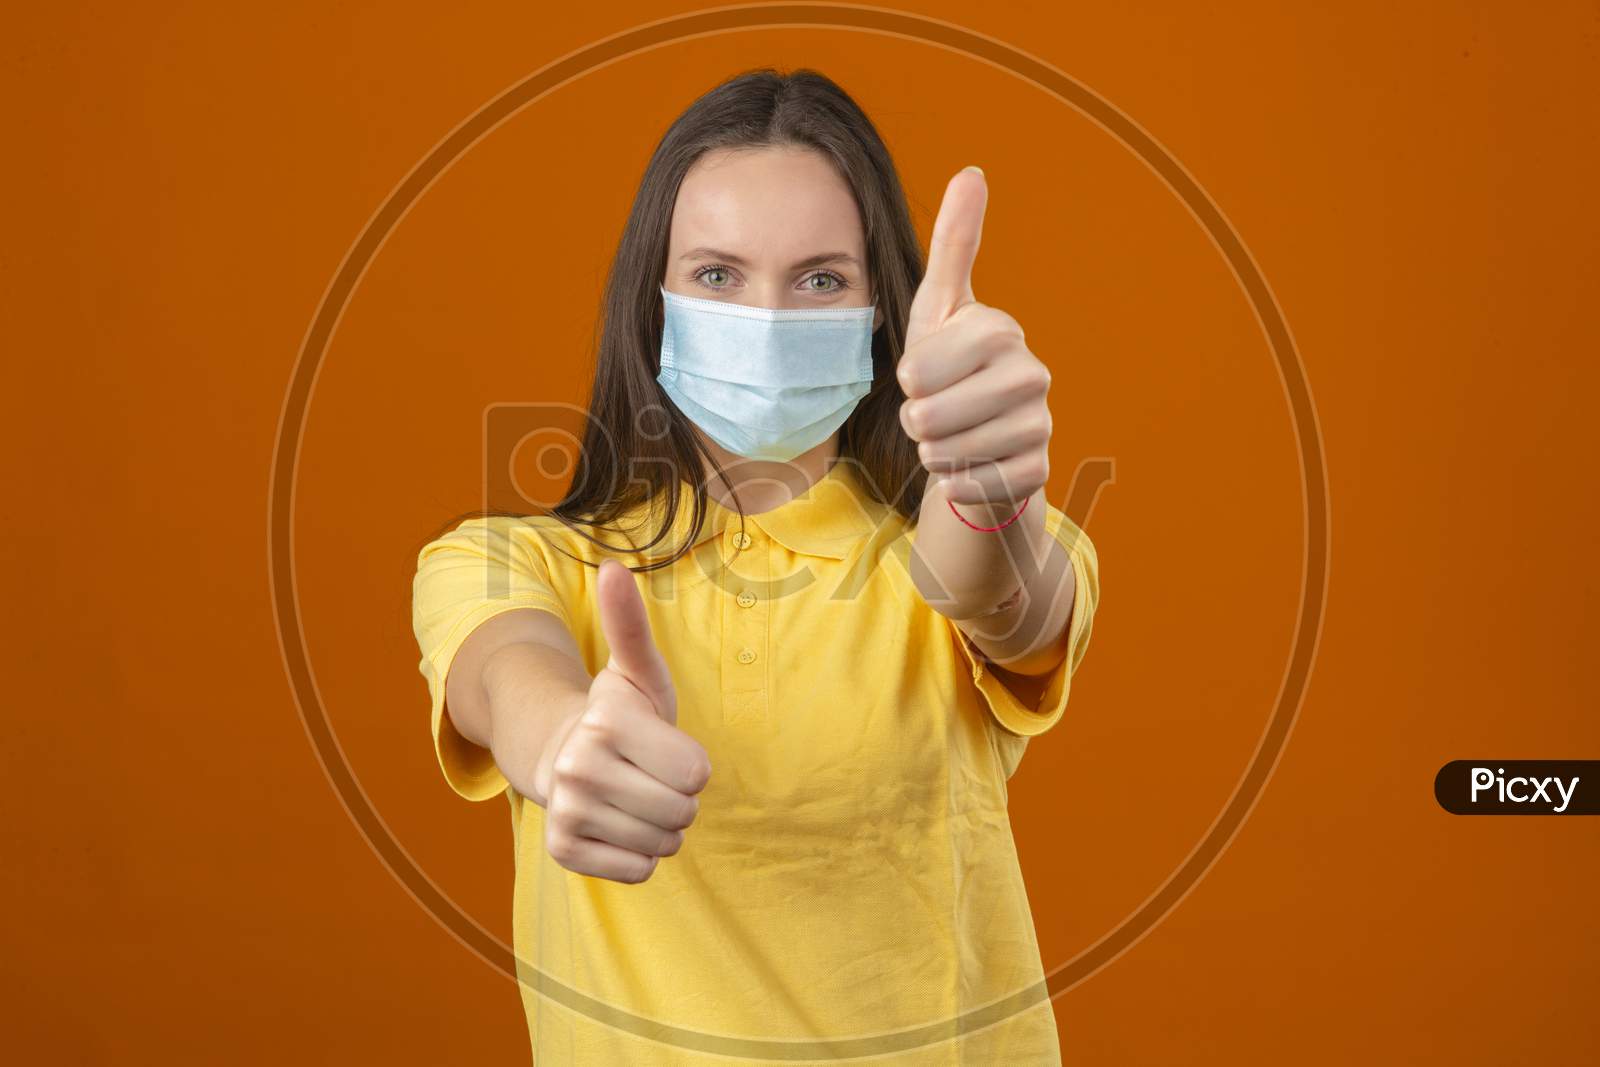 Young Woman In Yellow Polo Shirt And Medical Protective Mask Showing Thumb Up Sign Looking At Camera With Positive Expression On Orange Background